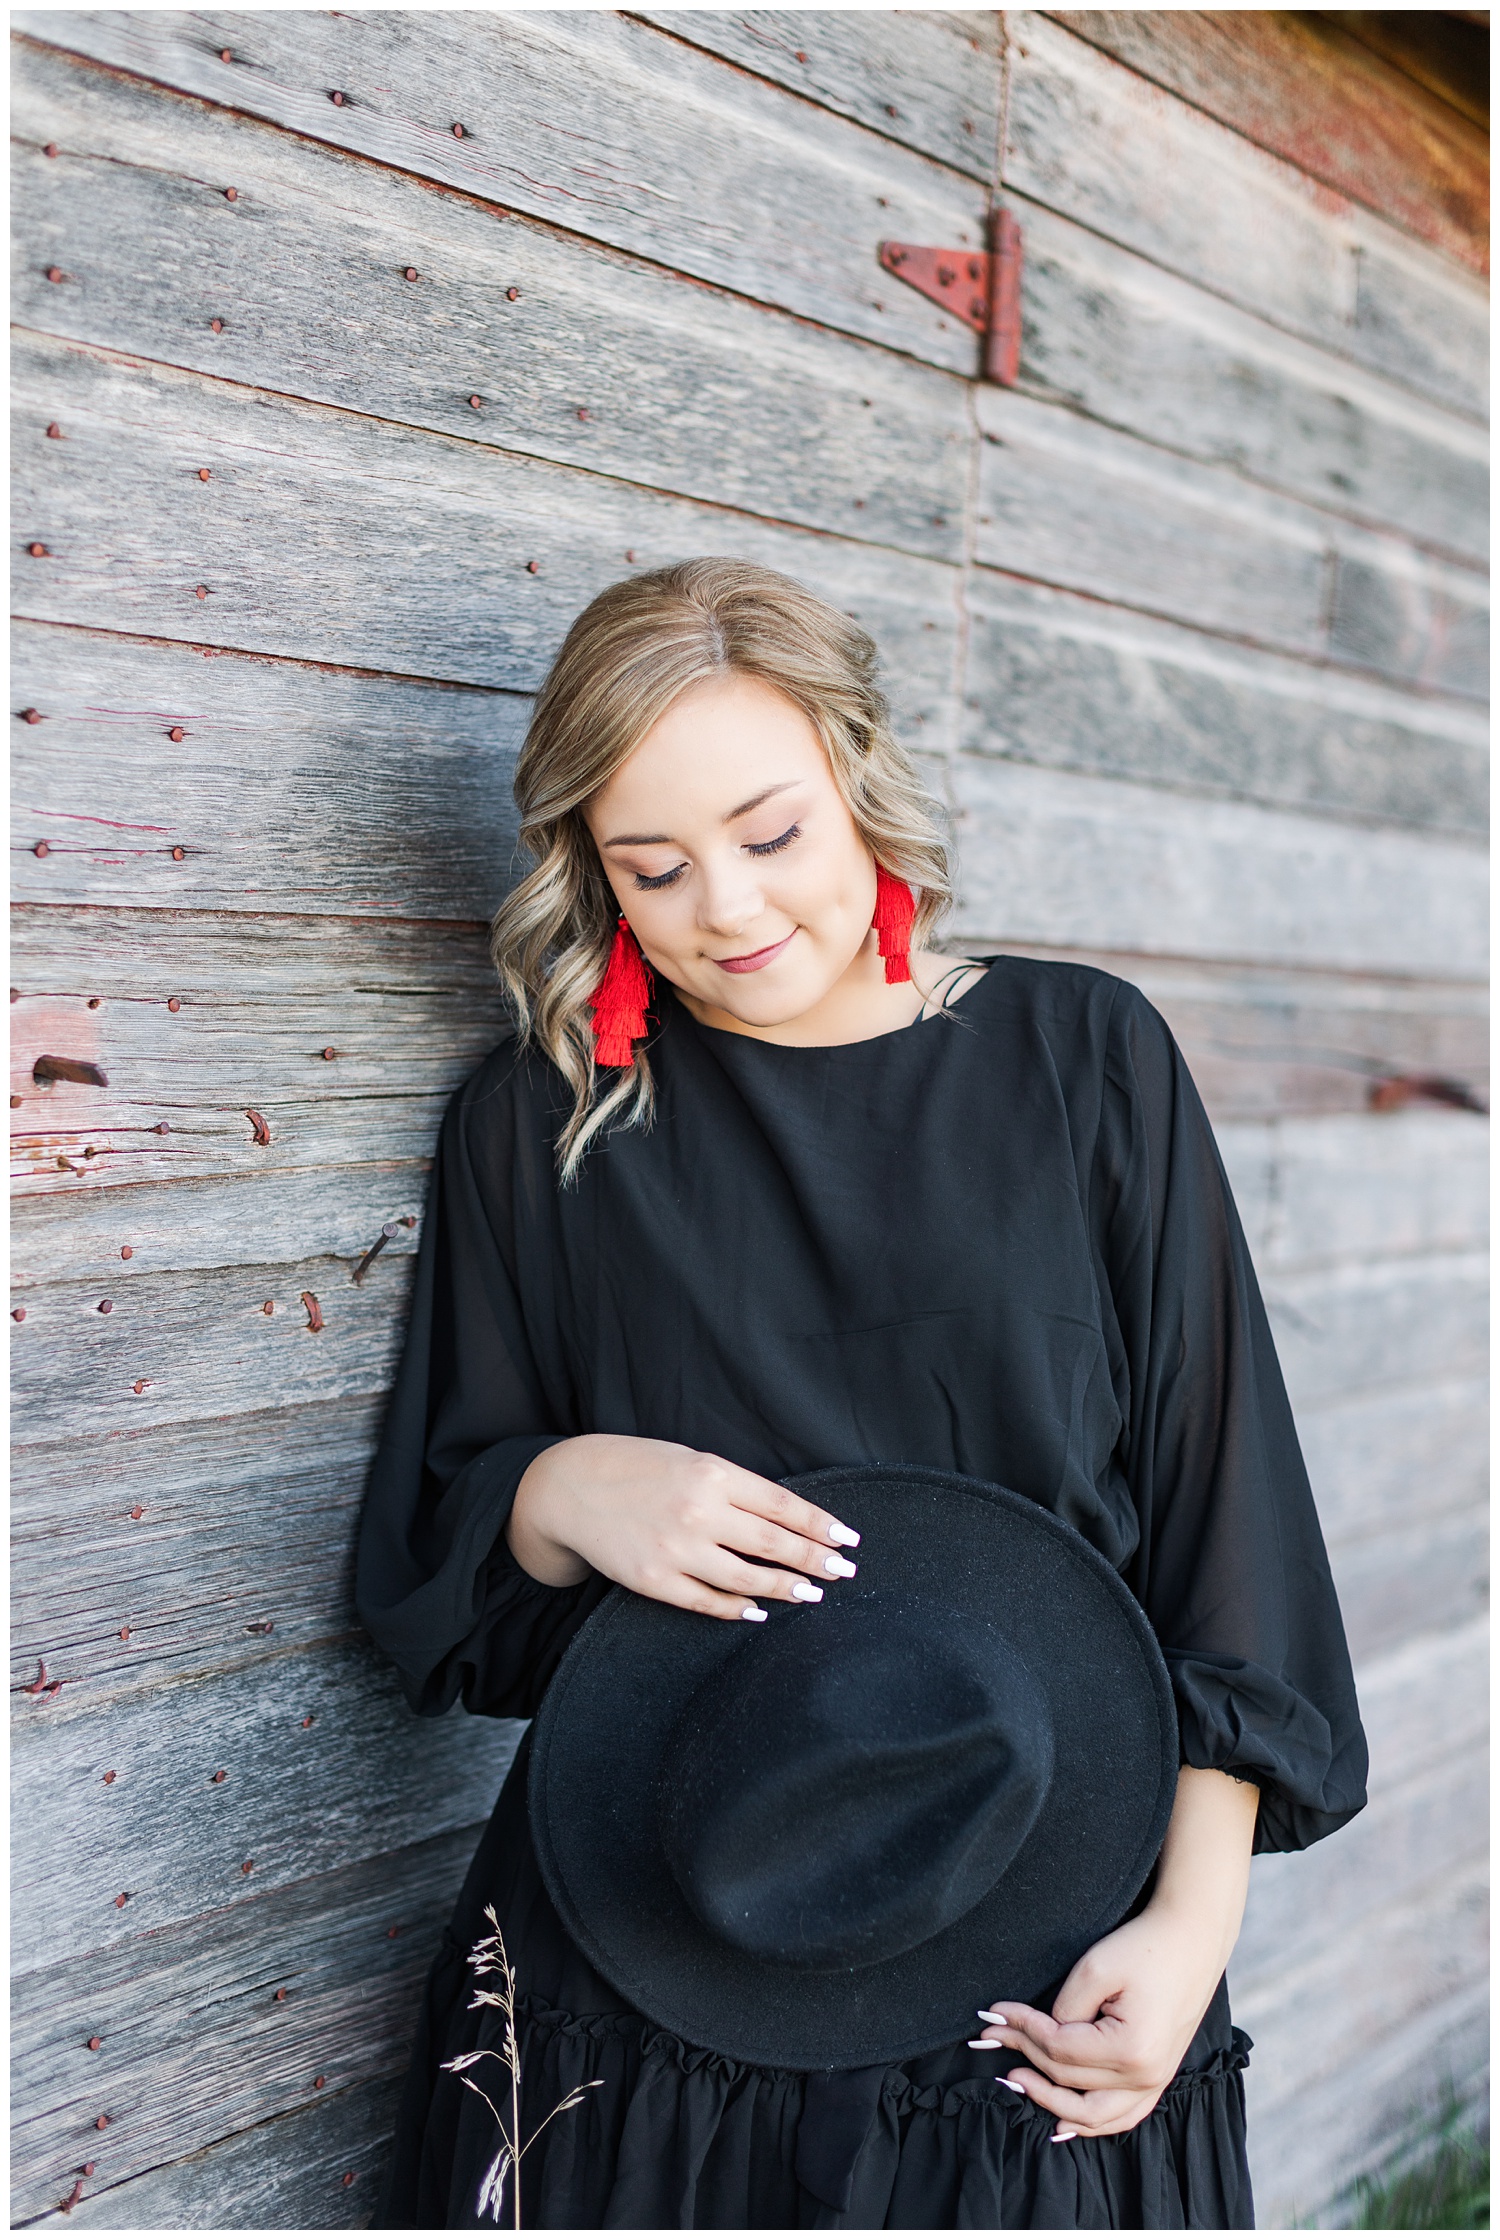 Cloey, wearing a black dress and red, statement tassel earrings, leans up against an old rustic barn while looking down at her hat | CB Studio